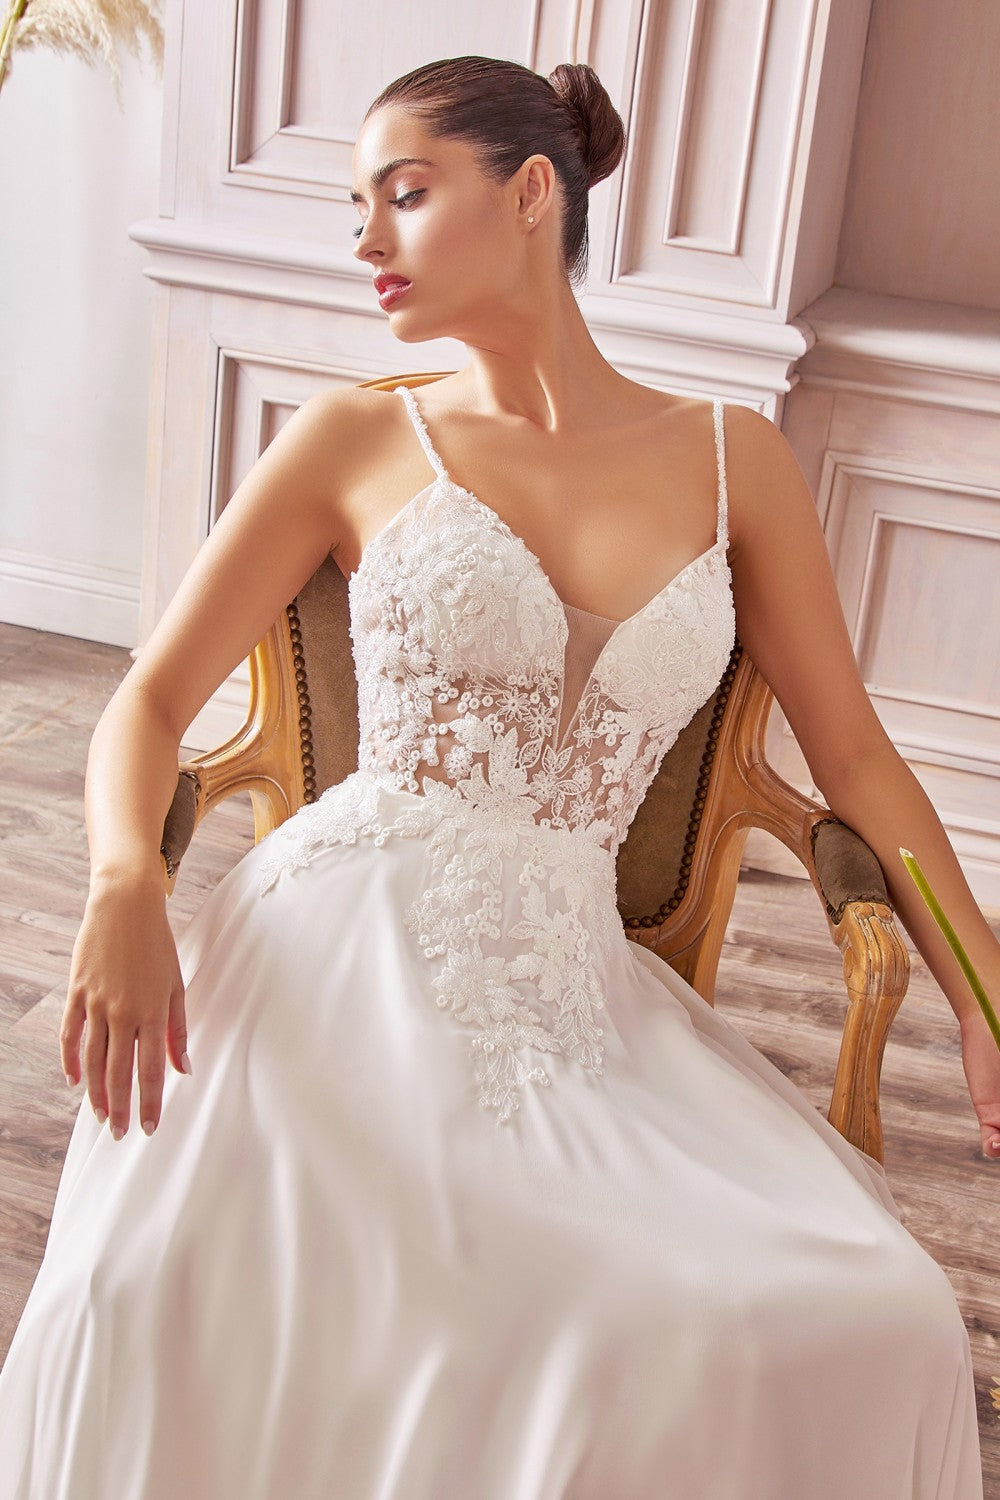 CD TY11 - A-Line Wedding Gown with Sheer Lace Embellished V-Neck